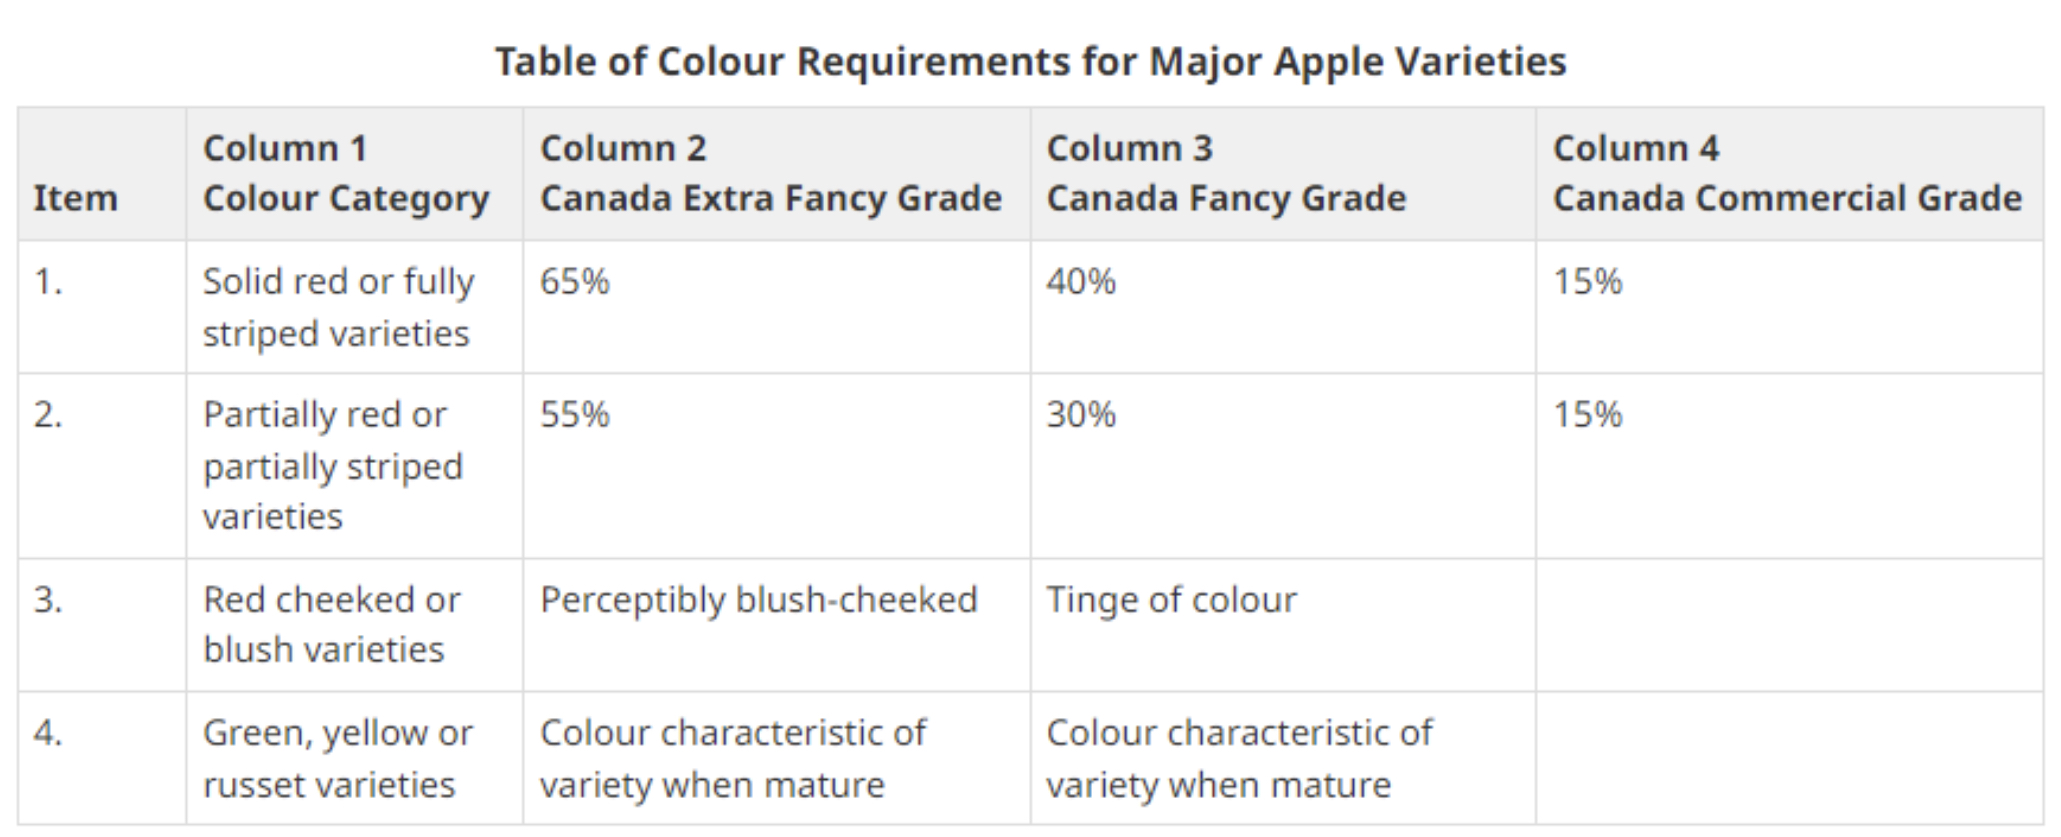 Canadian fancy grade requirements for apples